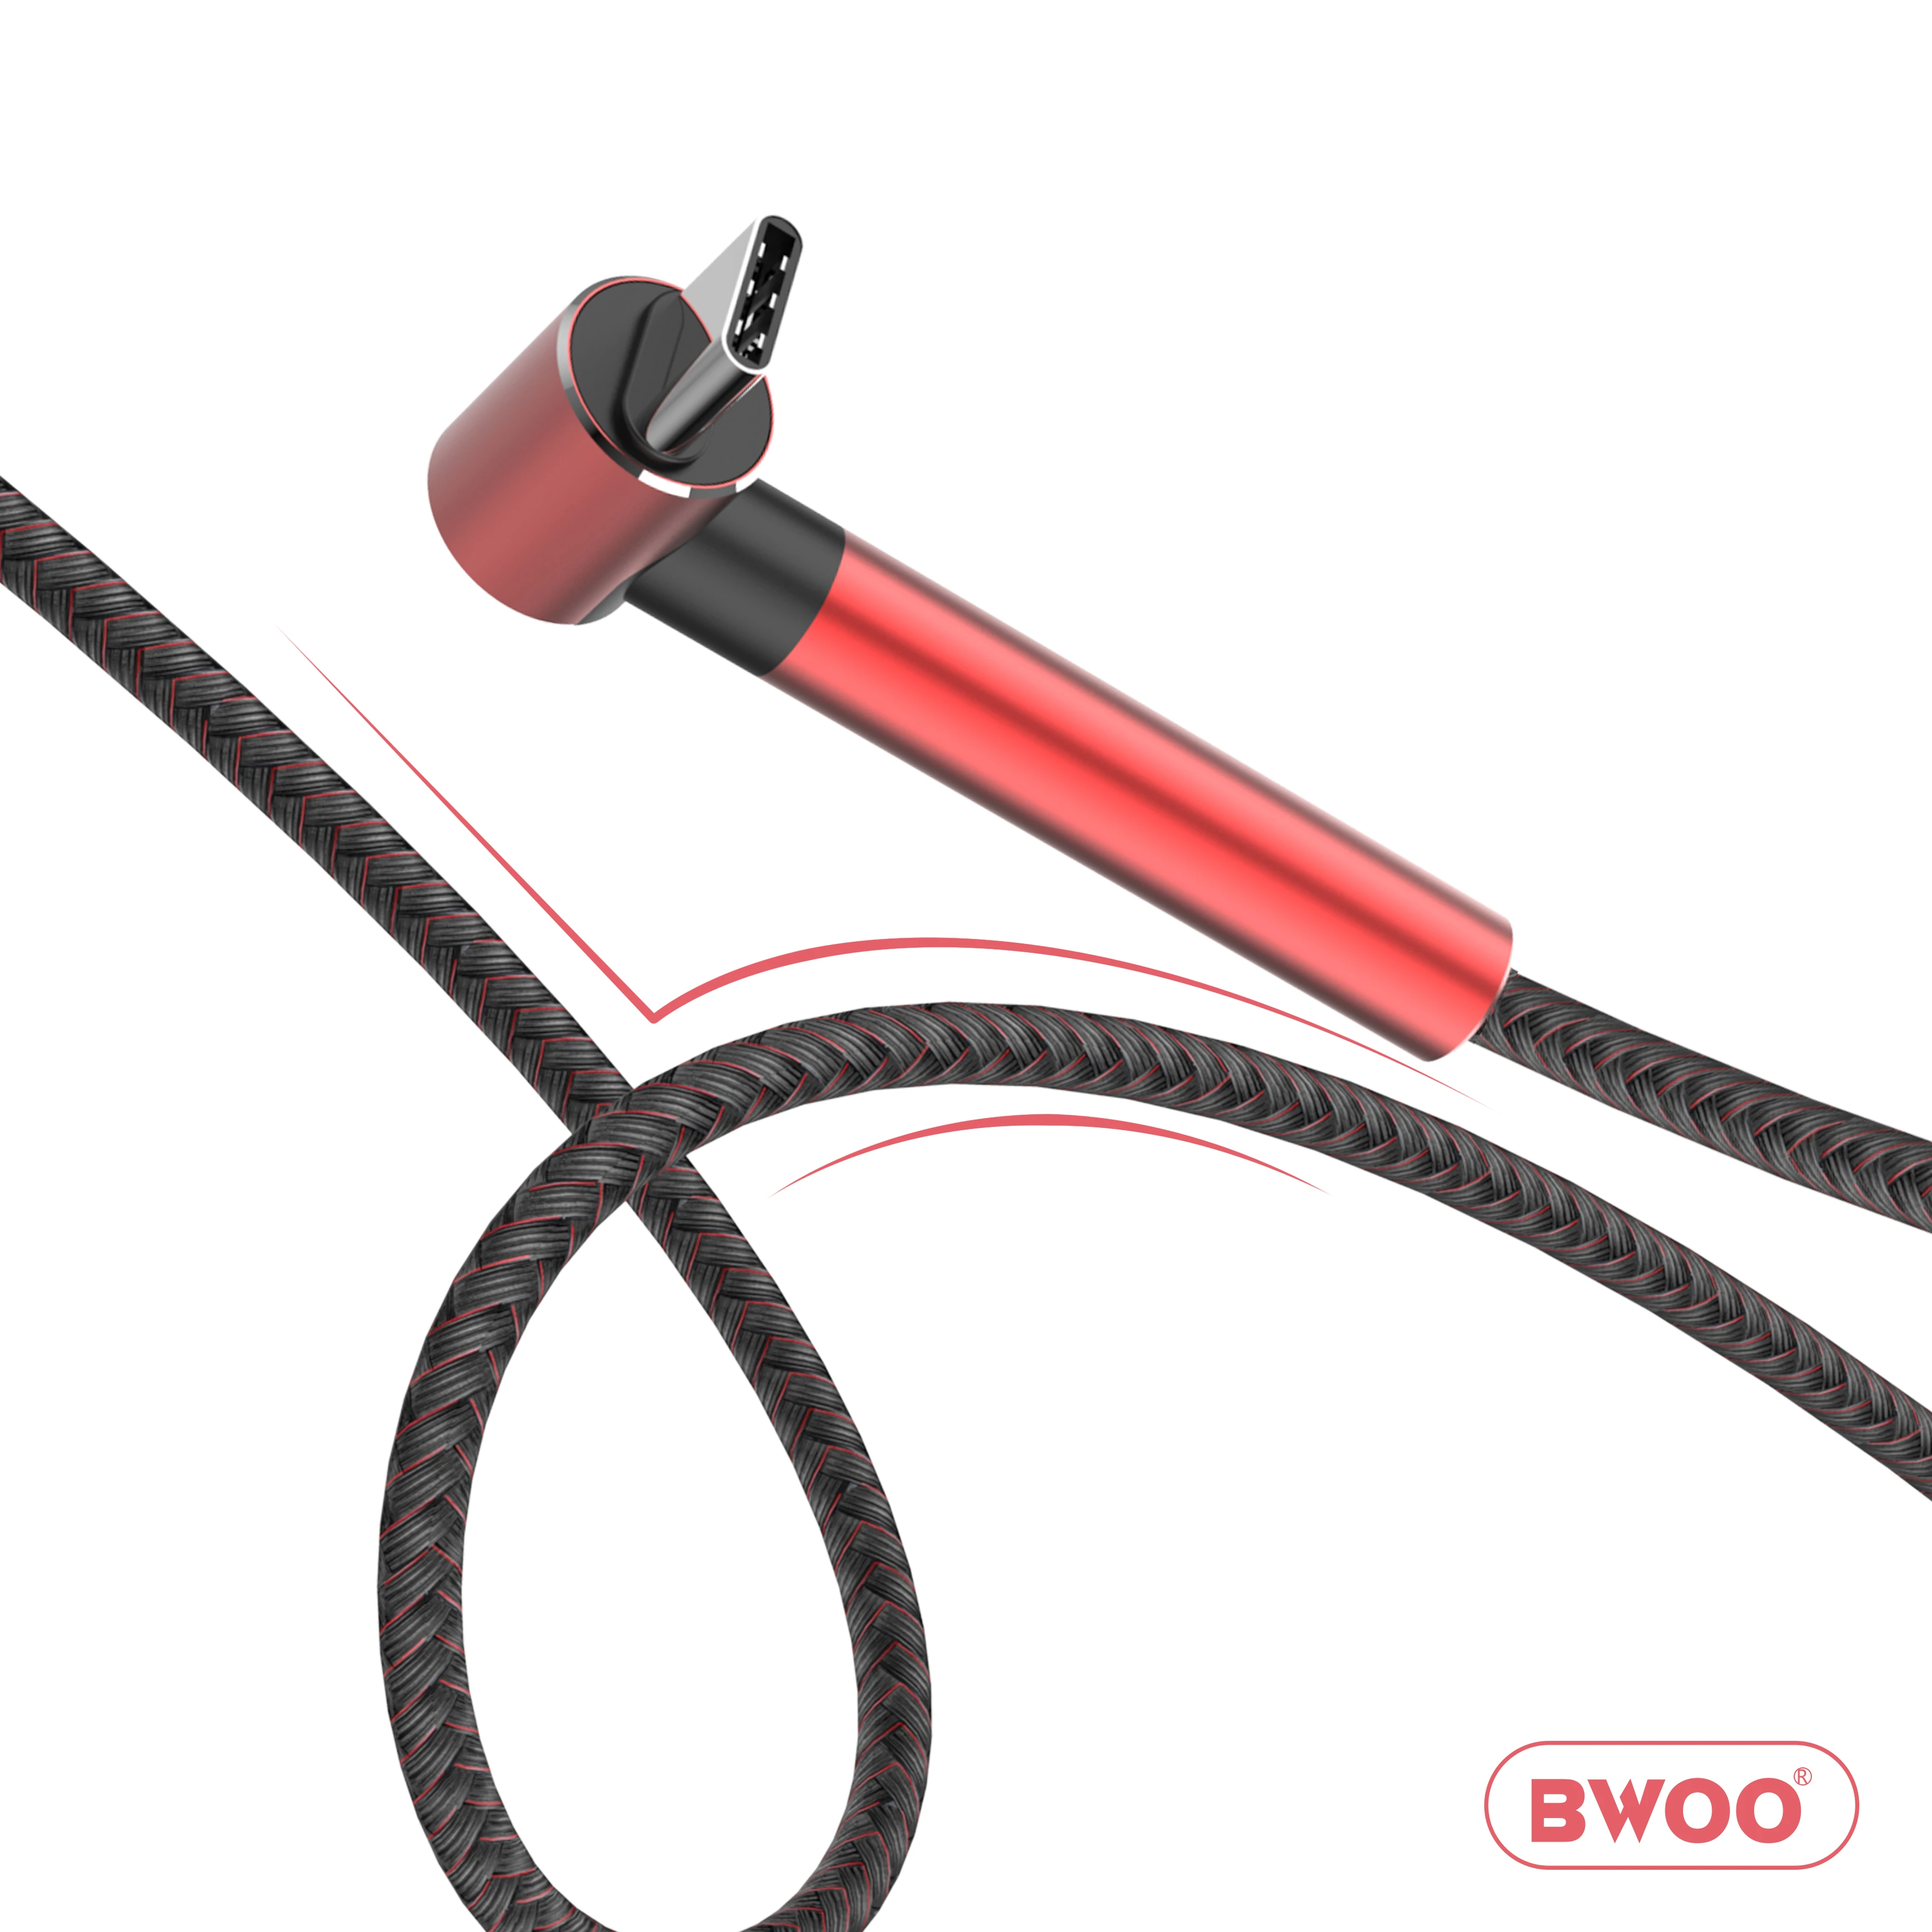 BWOO new products 90 elbow usb type c cable aluminum alloy+nylon braided fast charging 2.4a type-c data cable